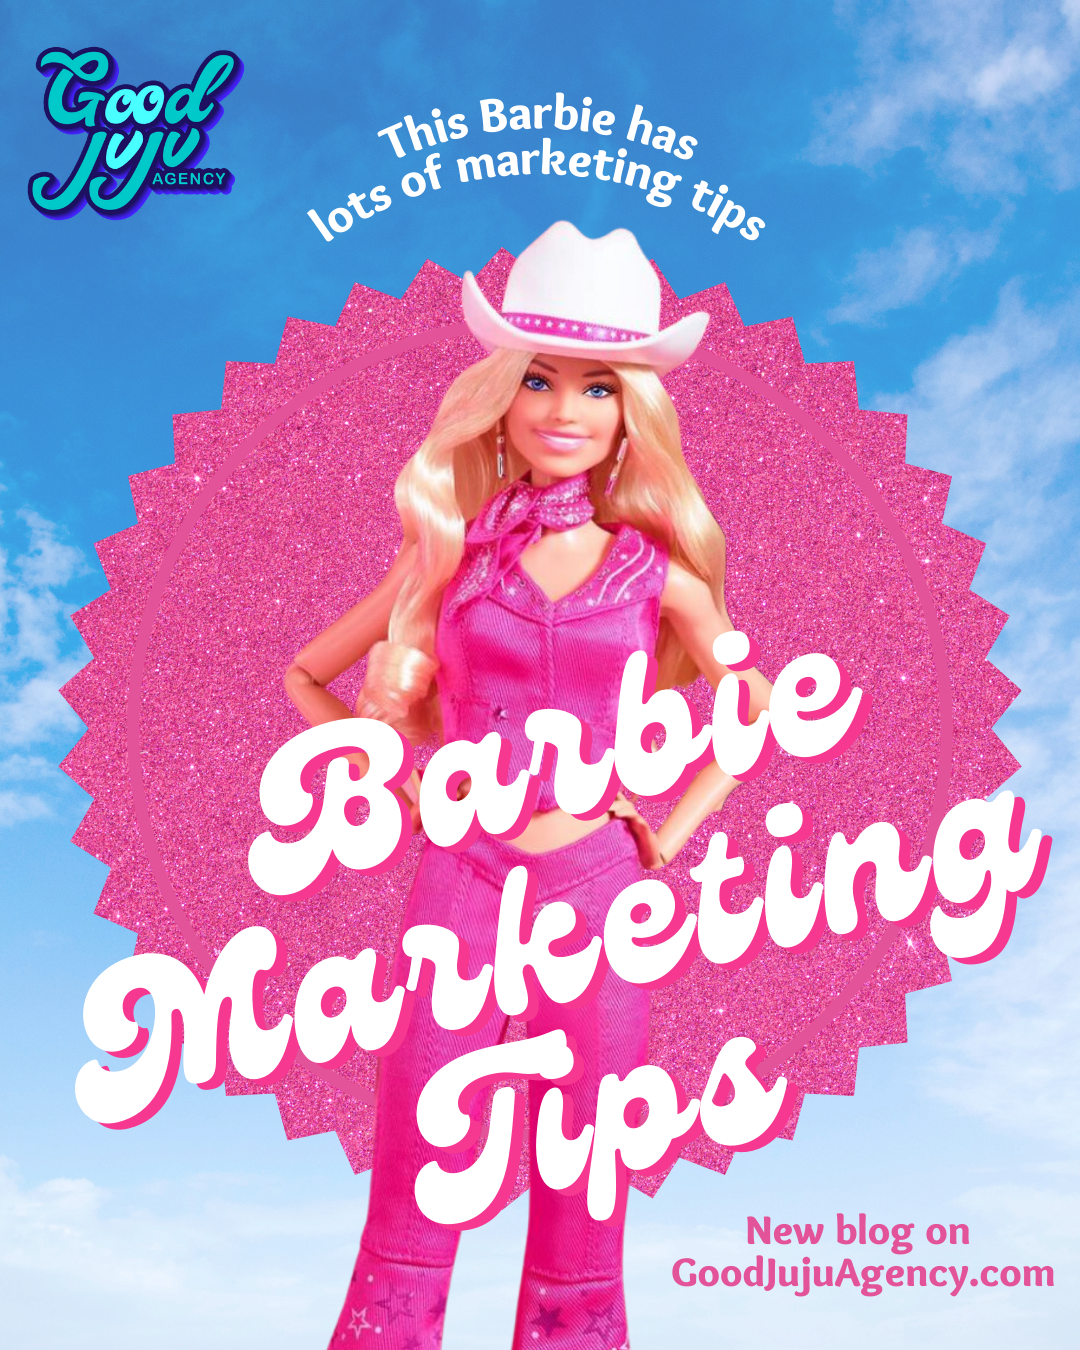 Barbie Marketing Tips. This Barbie has lots of marketing tips.